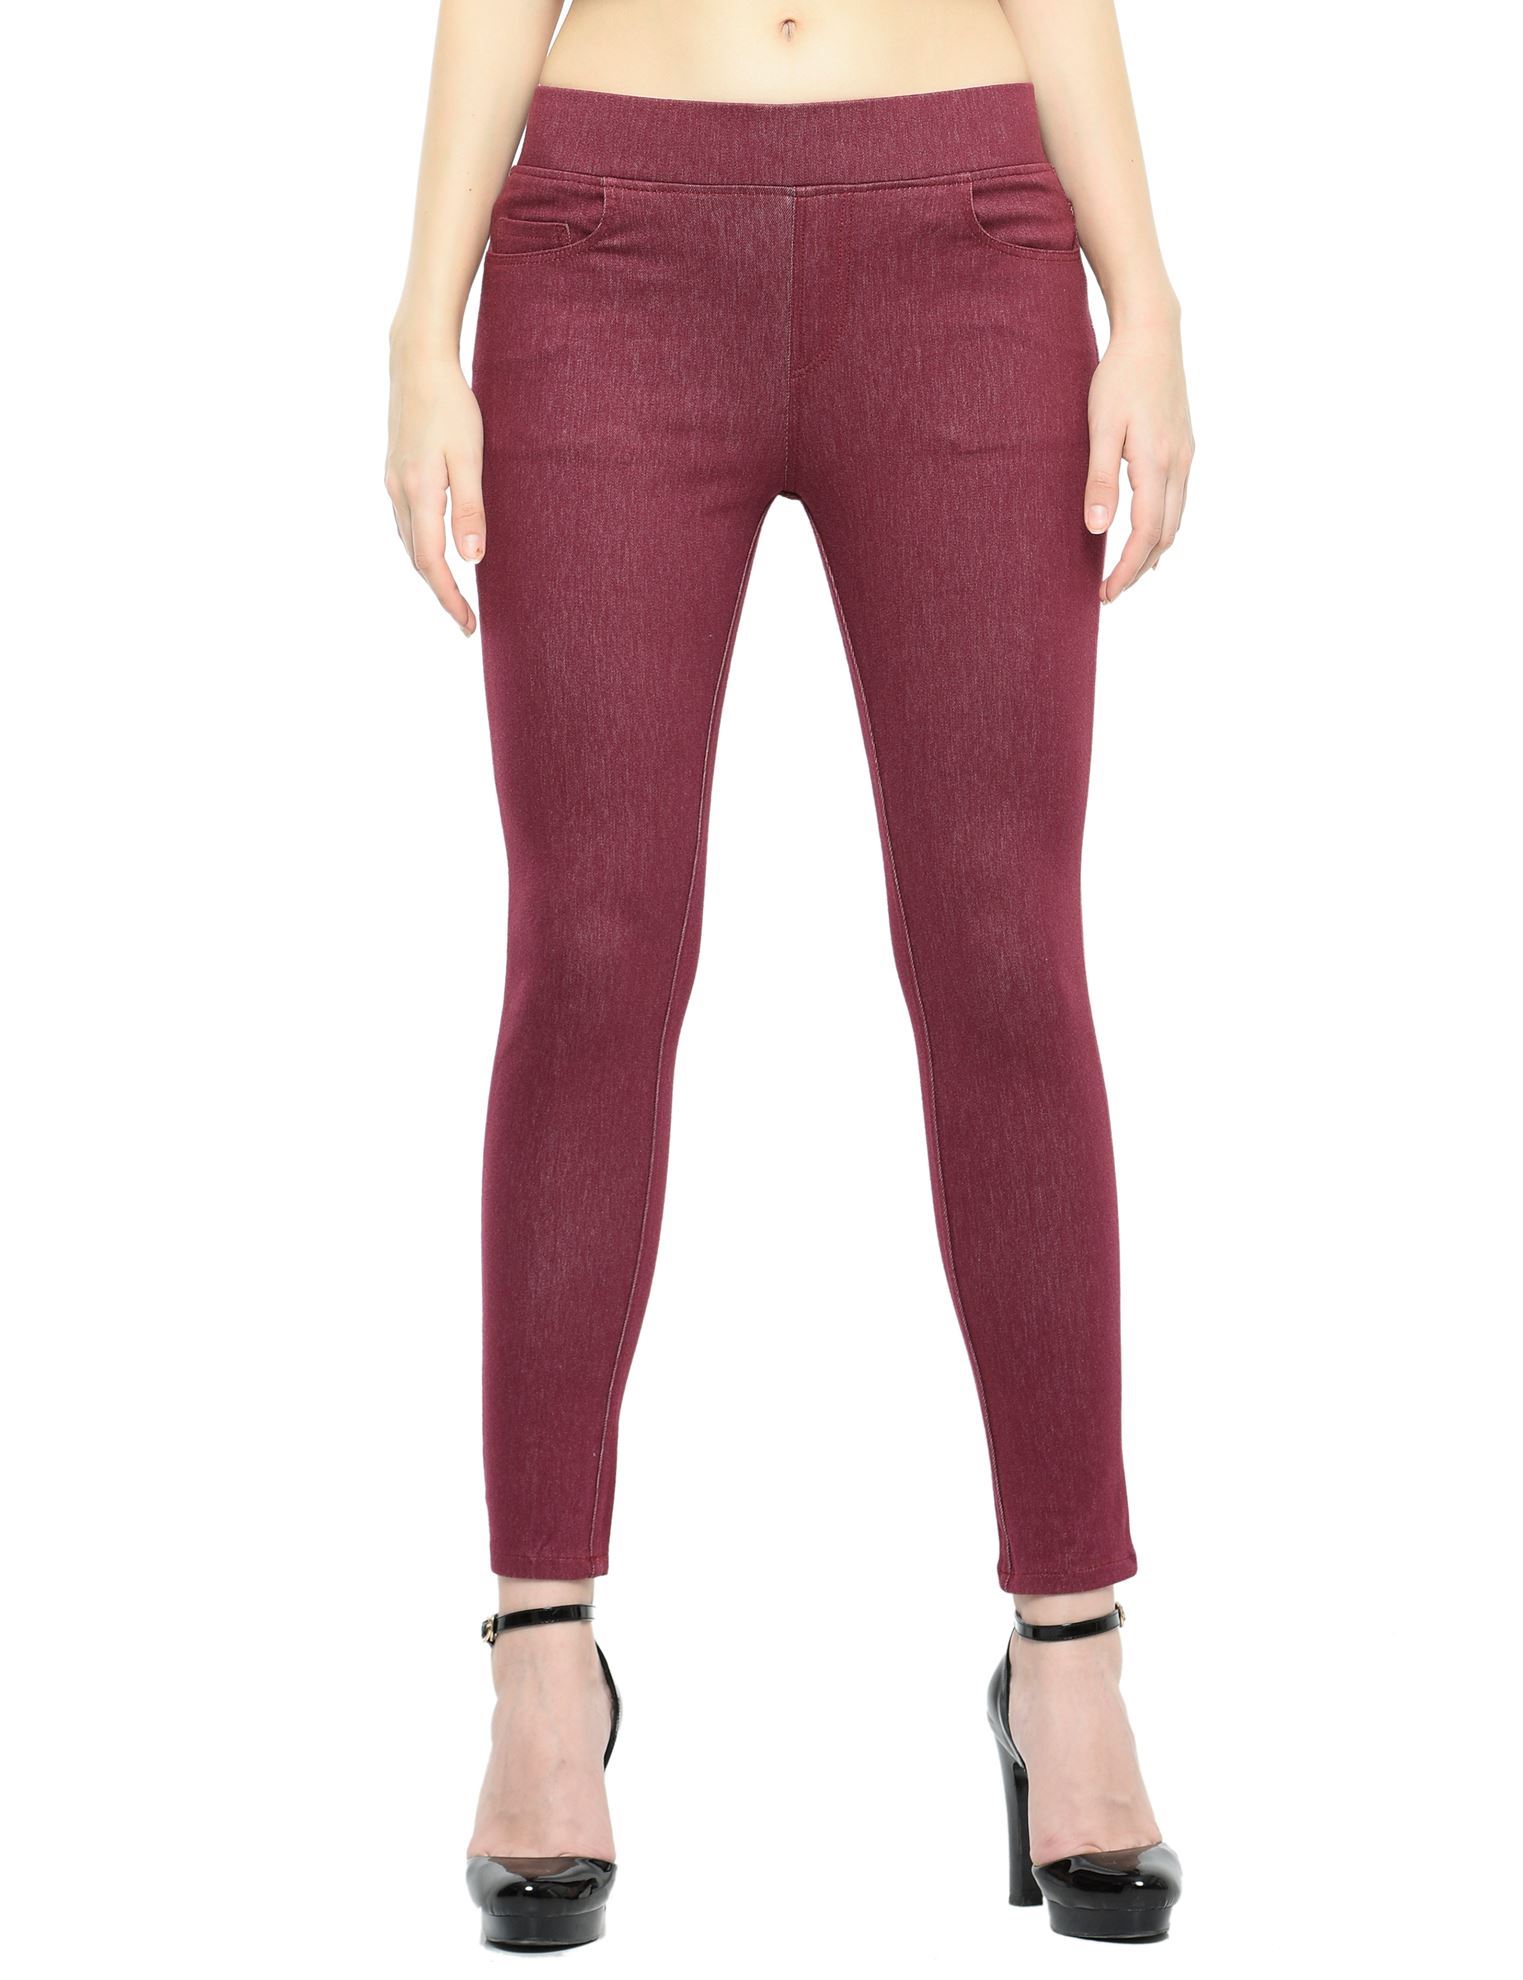 Frenchtrendz cotton viscose Spandex Dk Maroon Jeggings